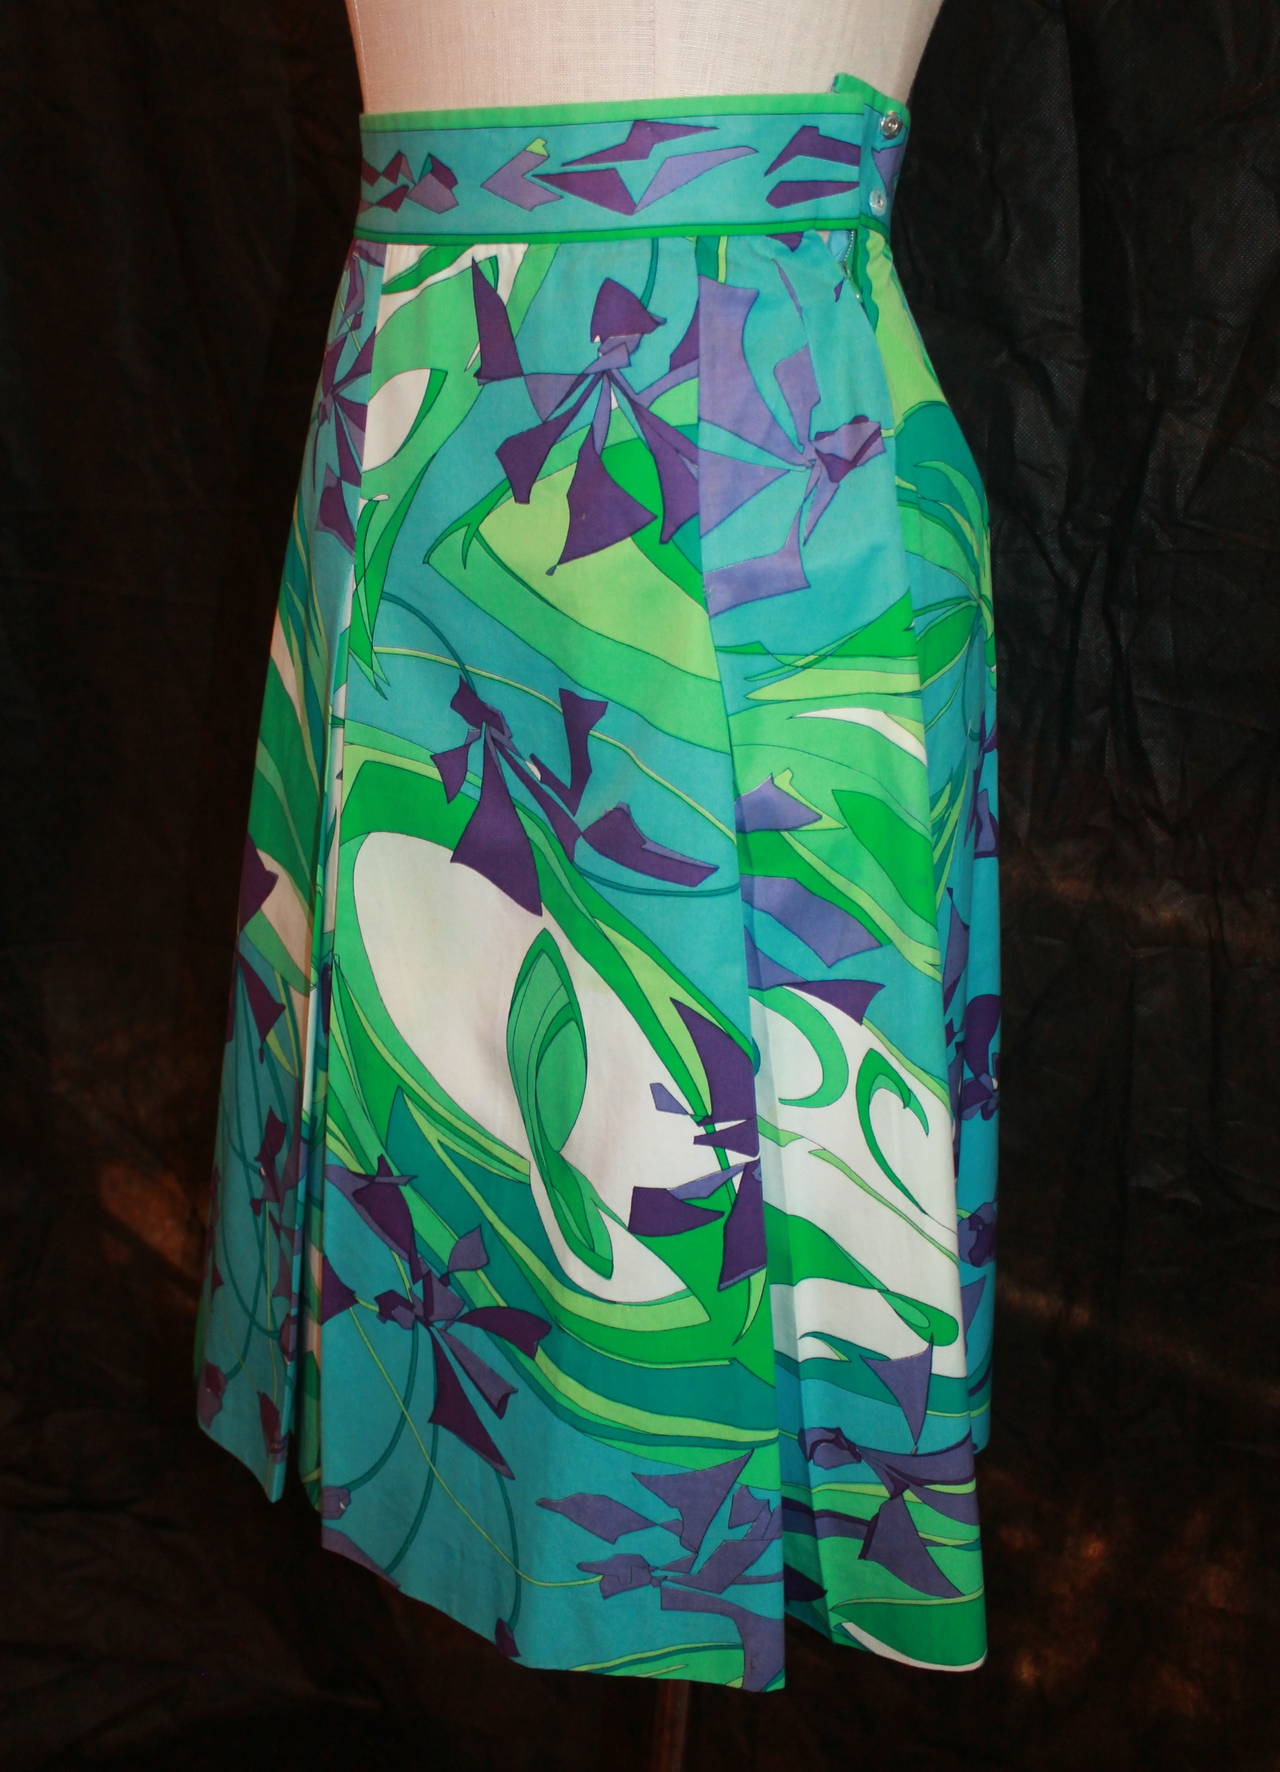 Pucci 1960s Blue & Green Floral Print Skirt - 10. This skirt is in excellent vintage condition with wear consistent with its age. The vintage size 10 is closer to a modern 4 or 2. 

Measurements:
Waist- 25"
Length- 25.25"
Hips-